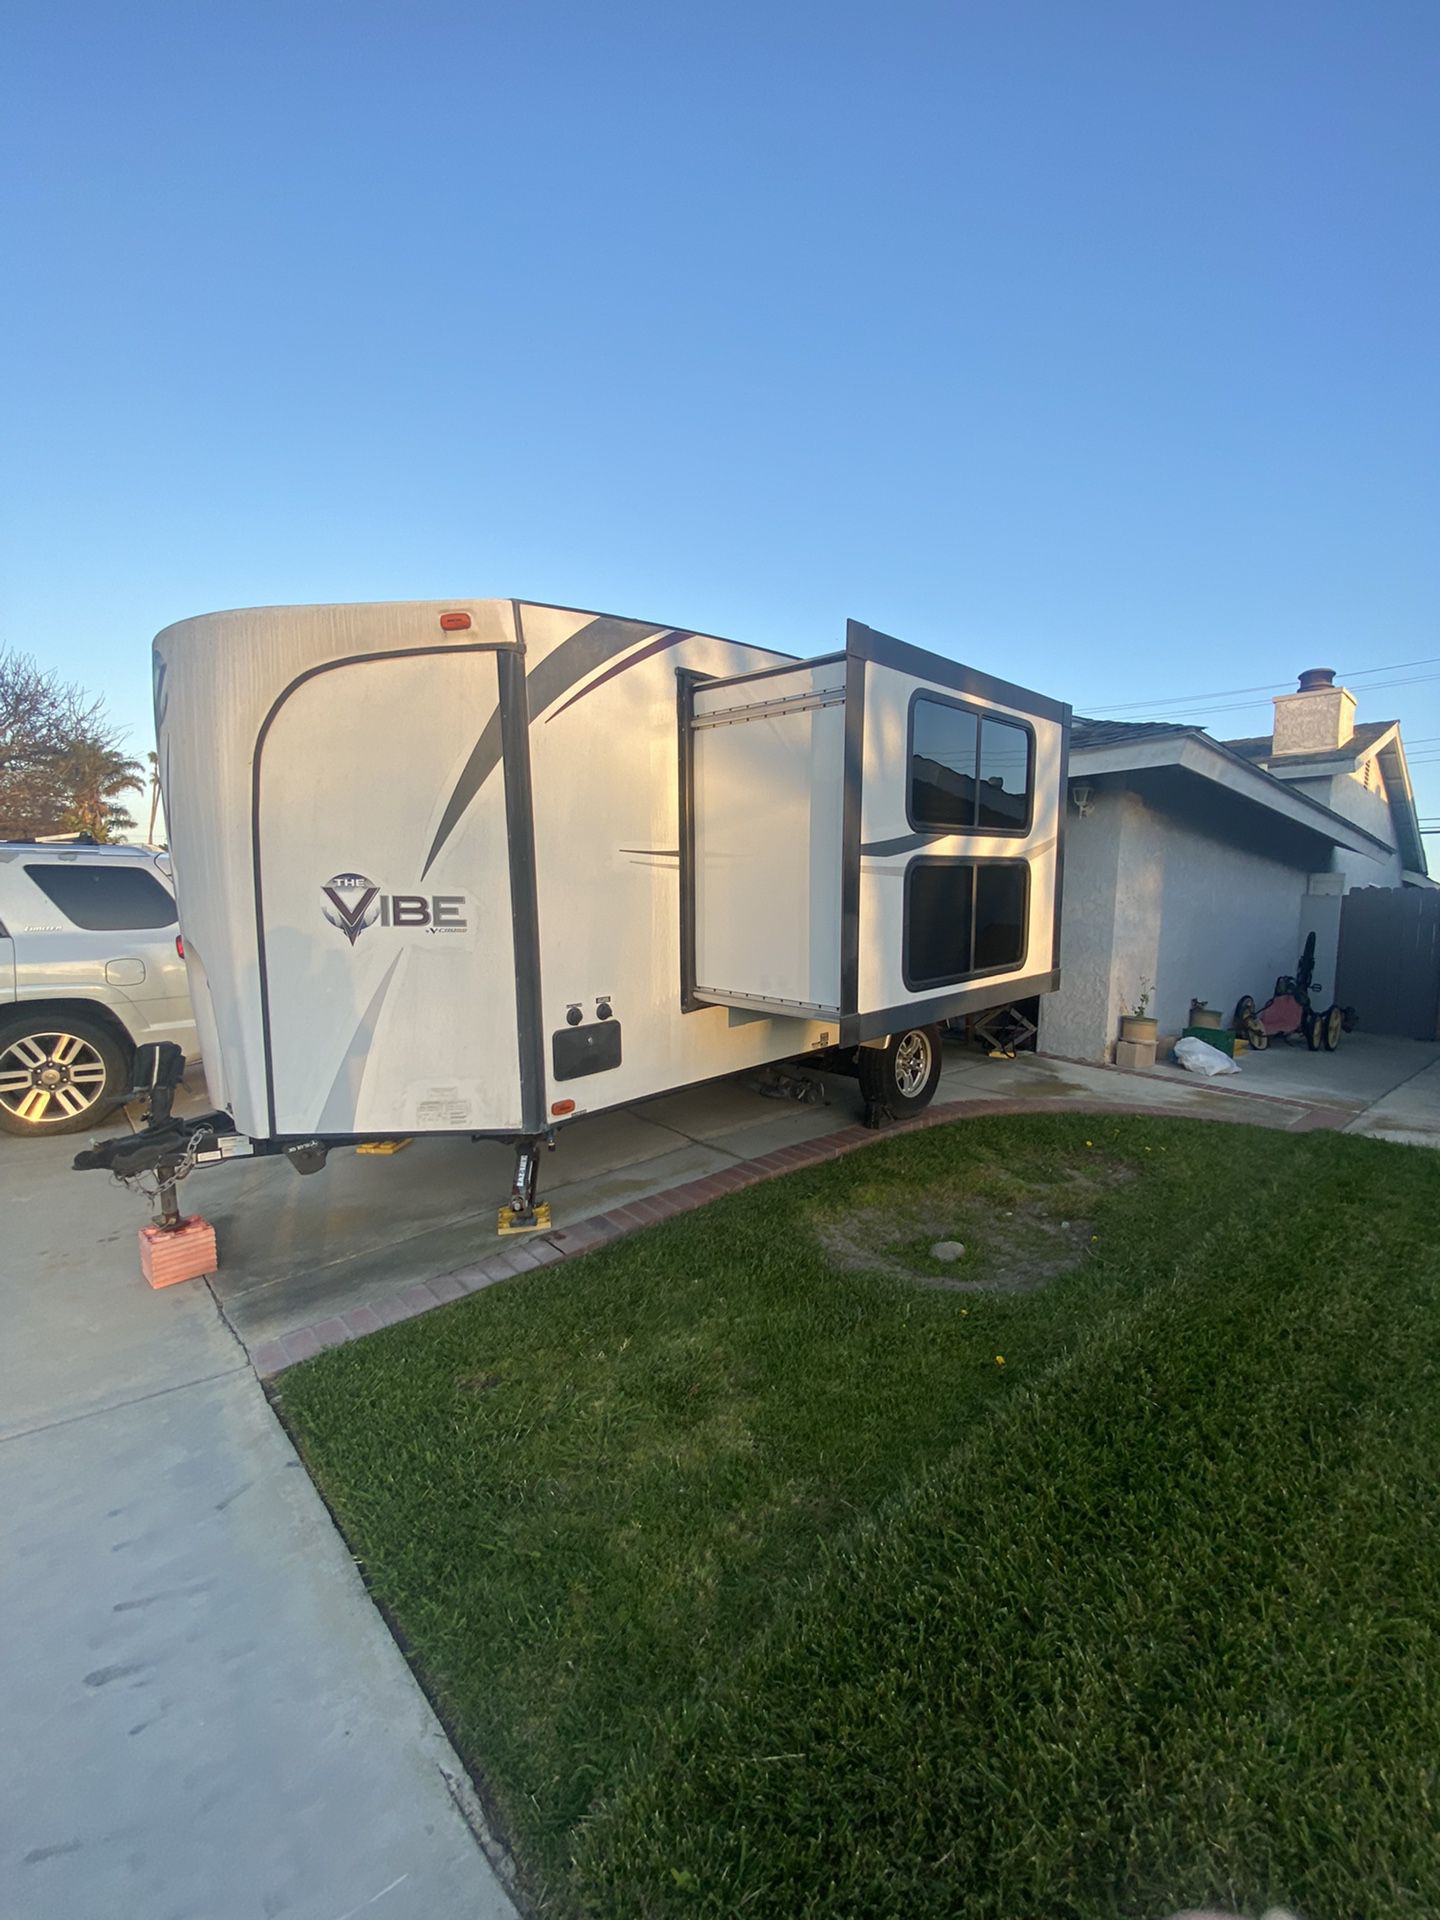 23 Foot Vibe Travel Trailer. With A Slide Out. 